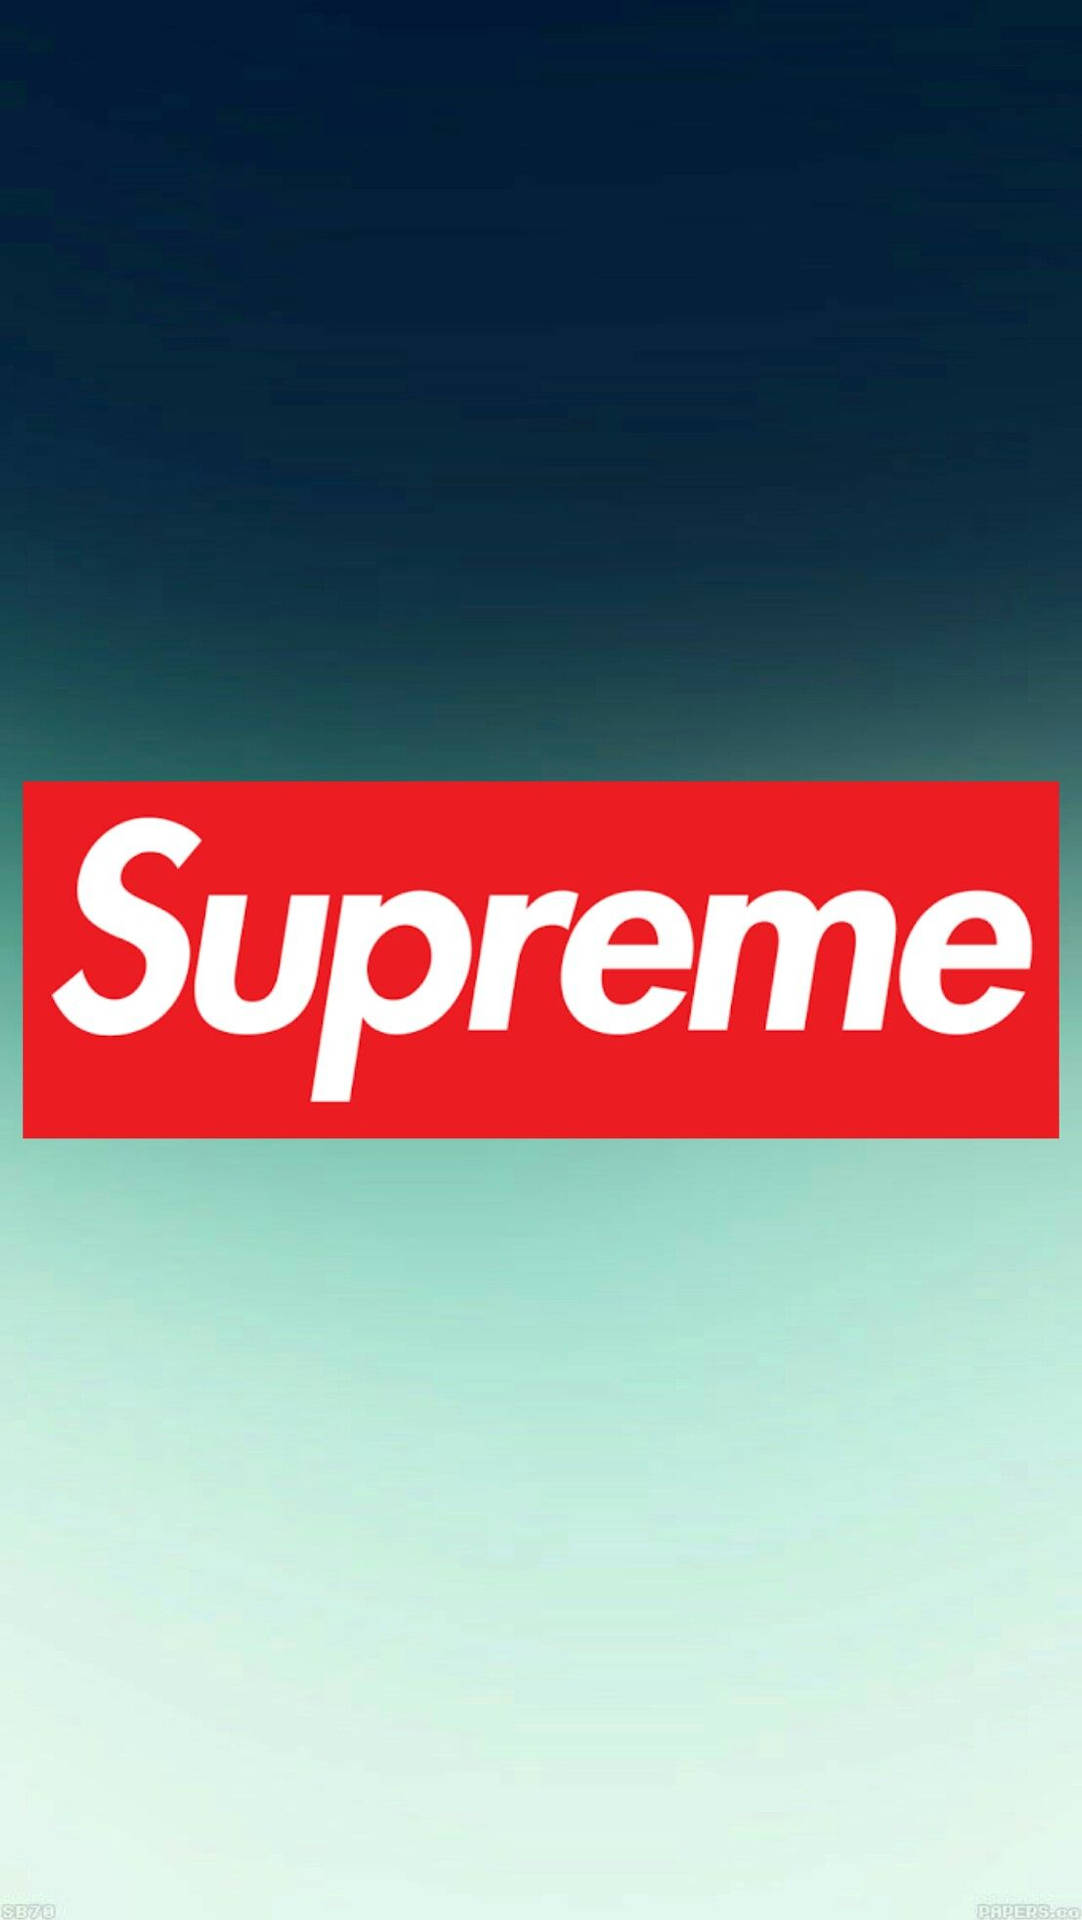 Supreme 1107X1965 Wallpaper and Background Image